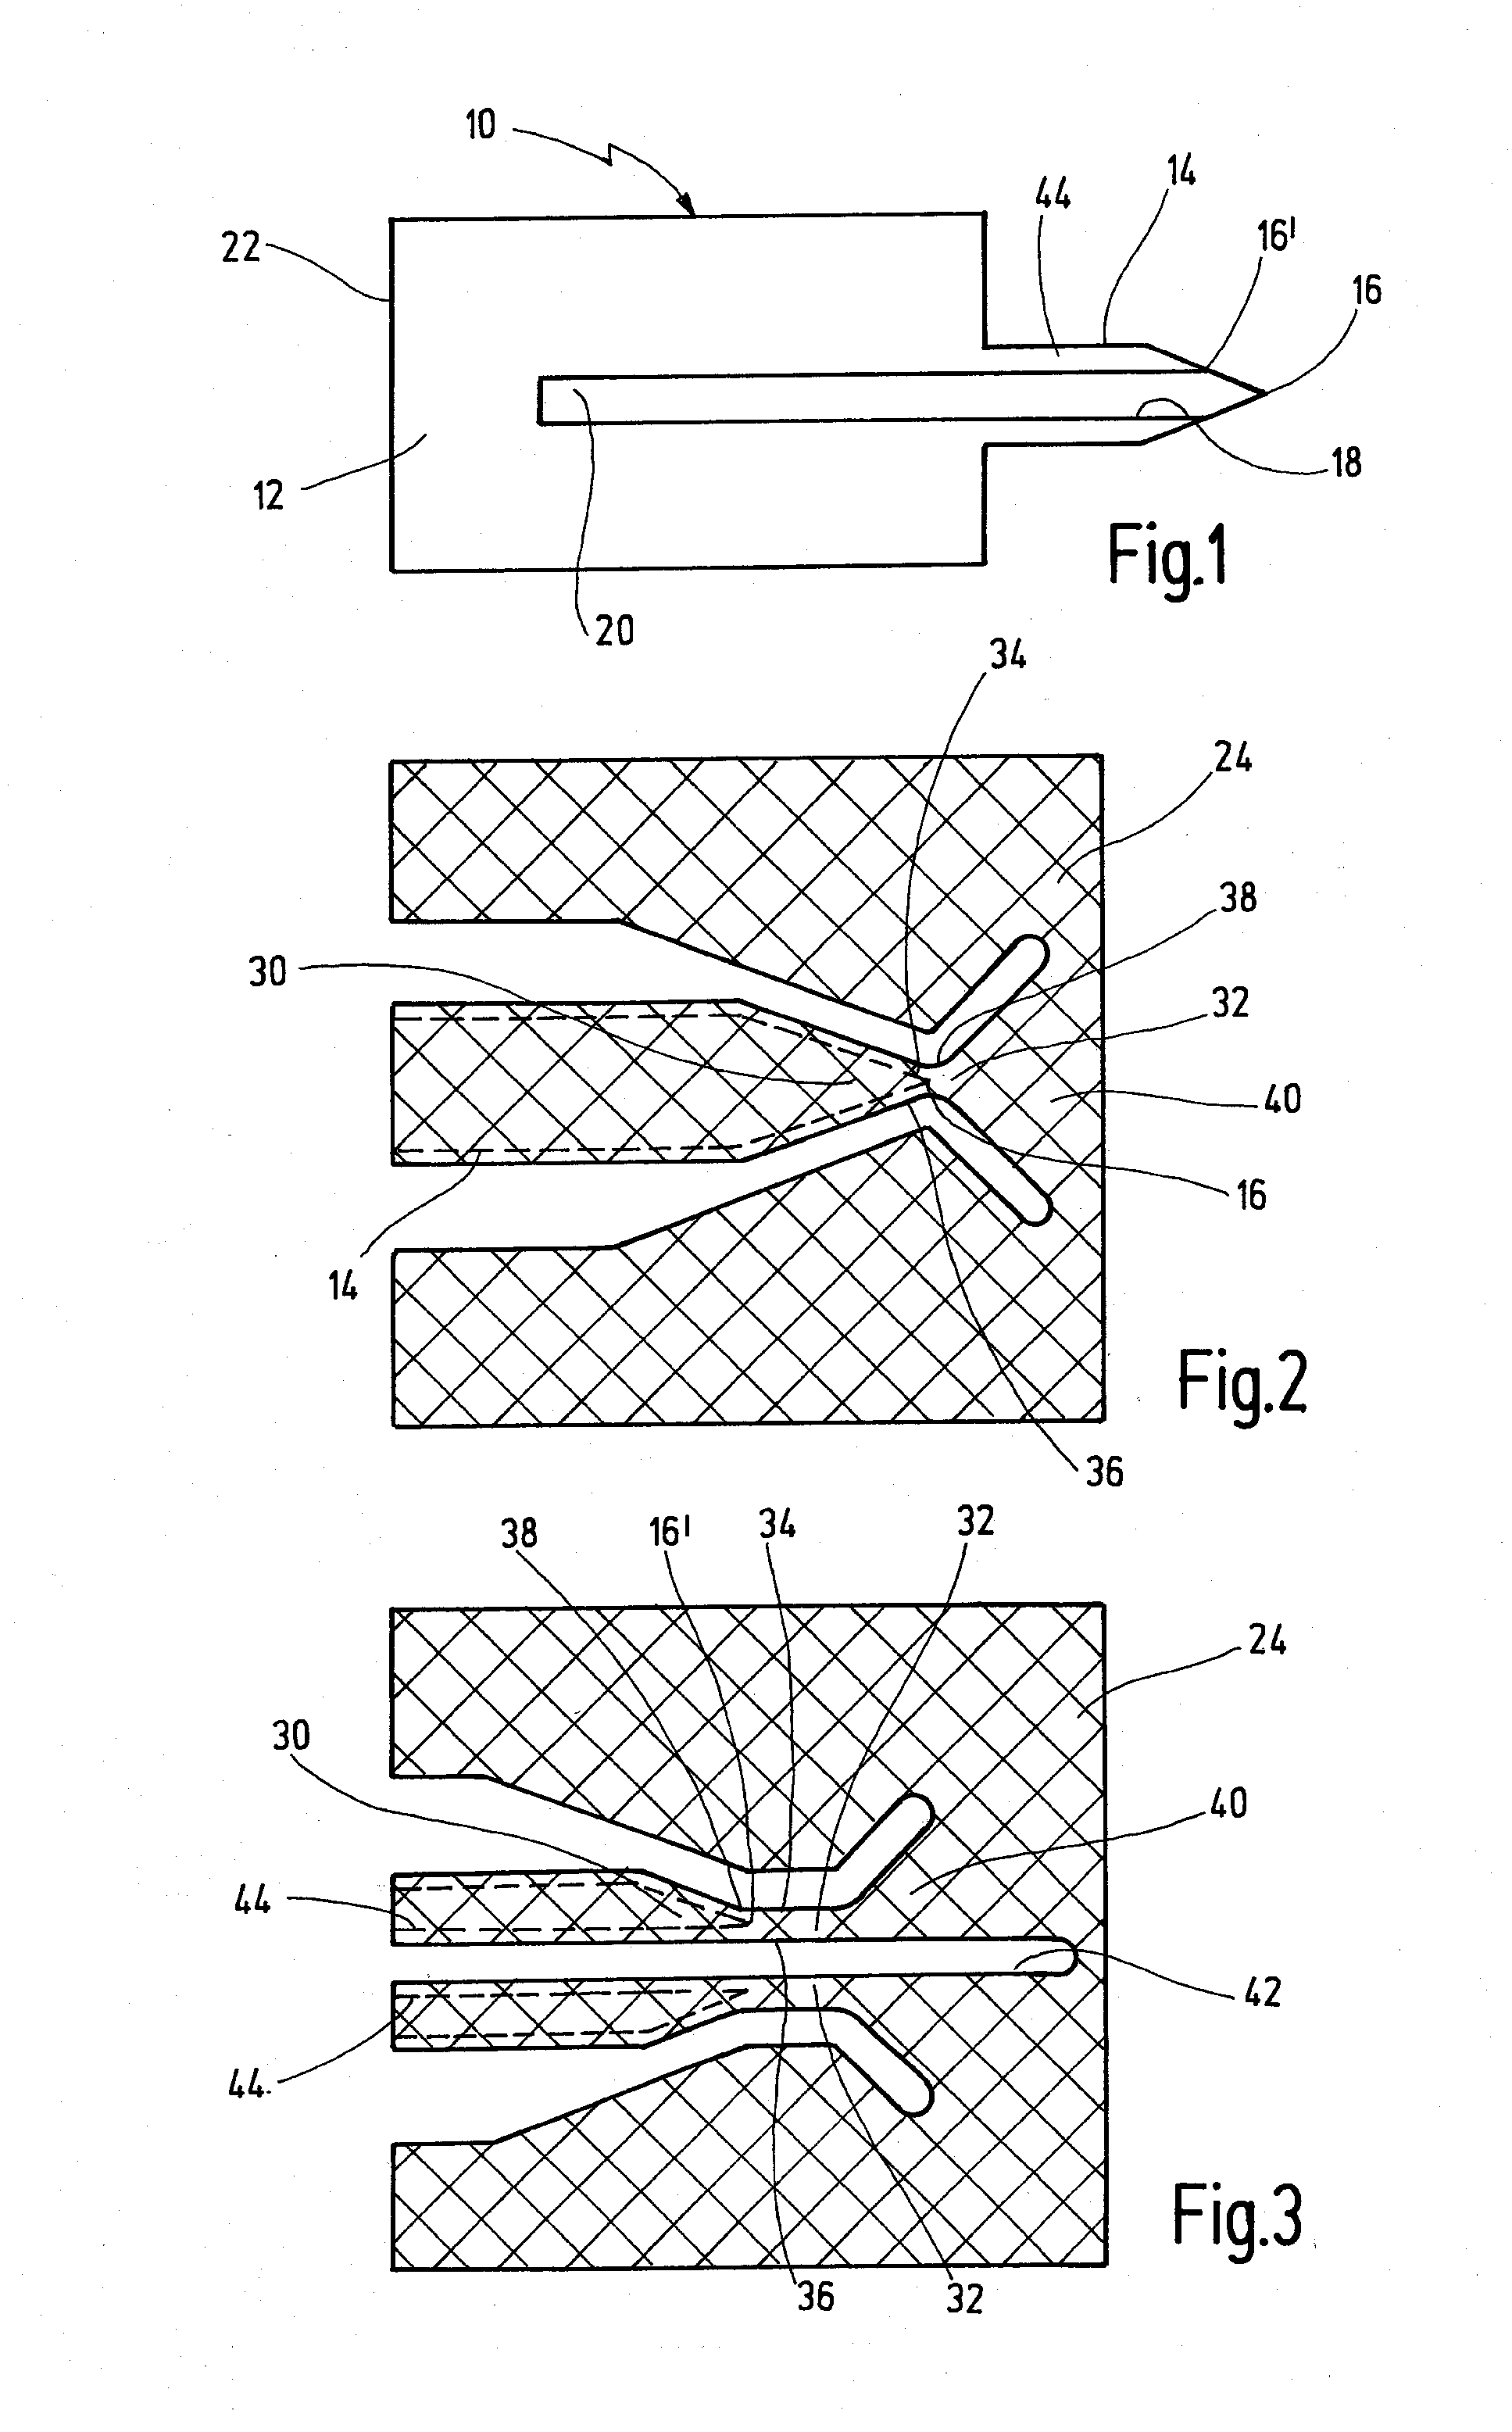 Method for producing a pricking element